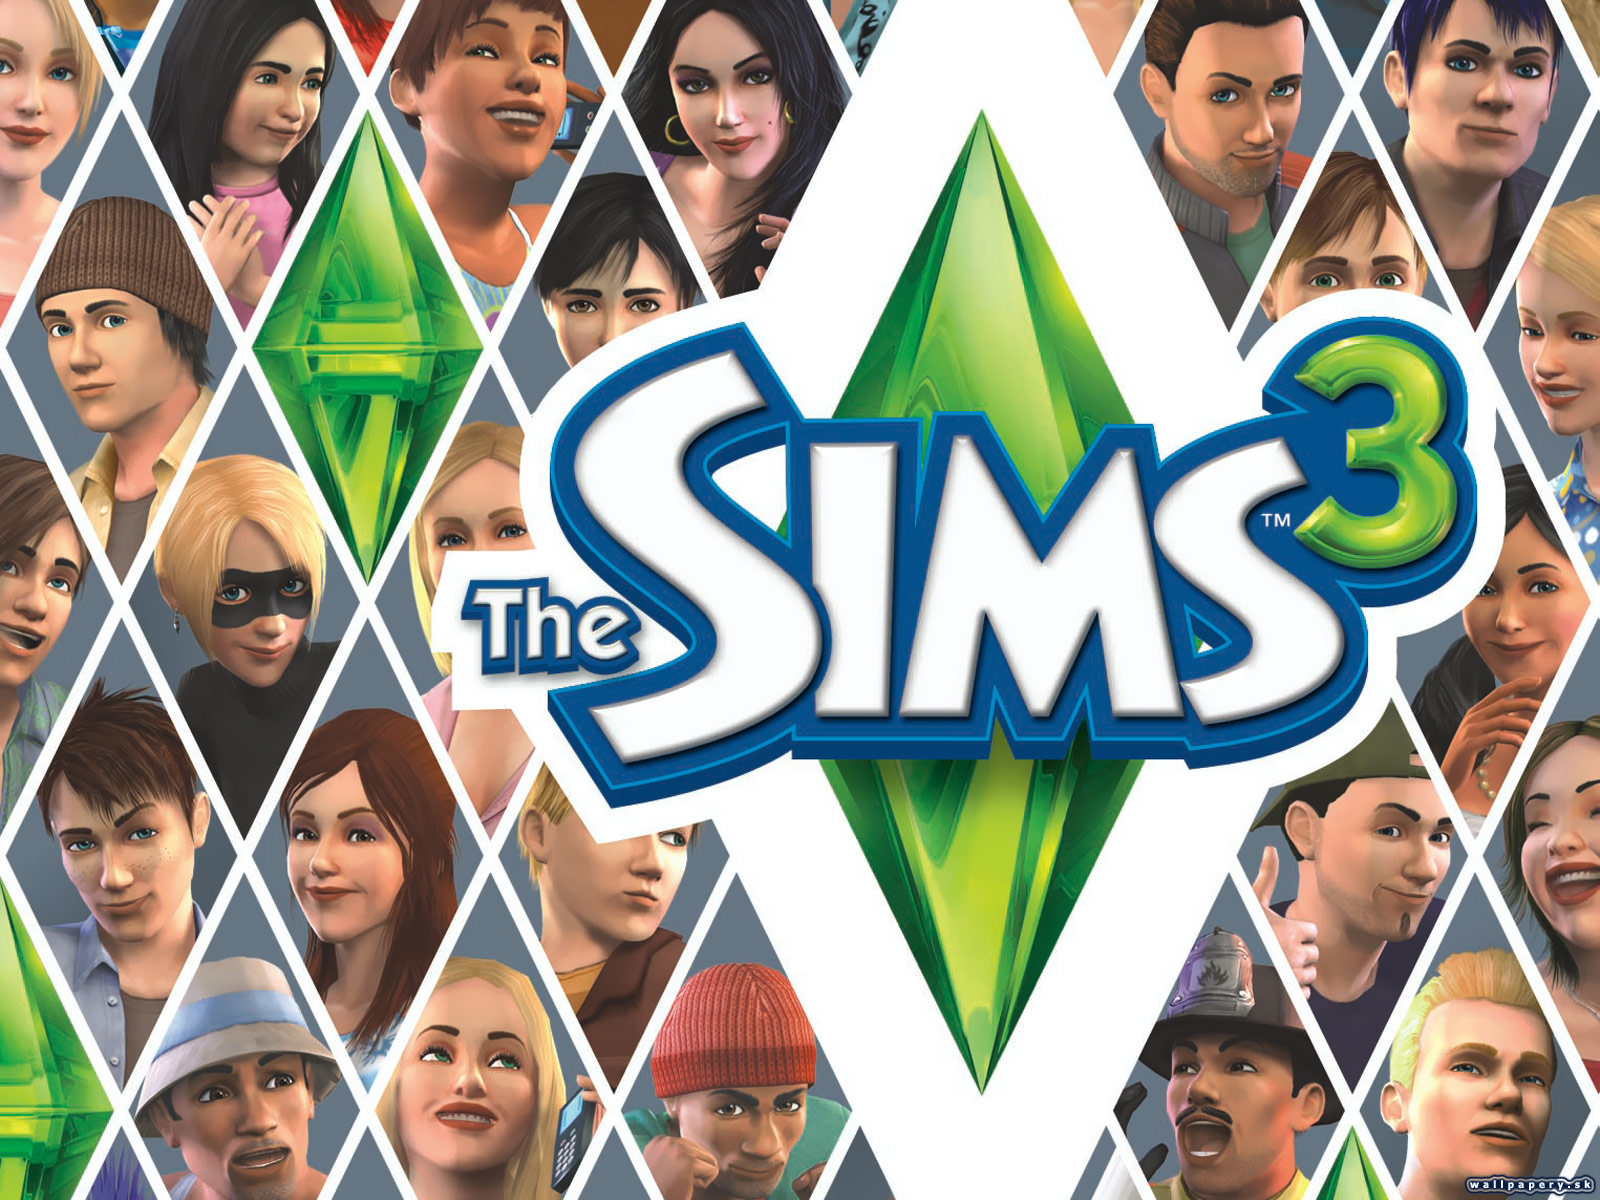 The Sims 3 - wallpaper 11